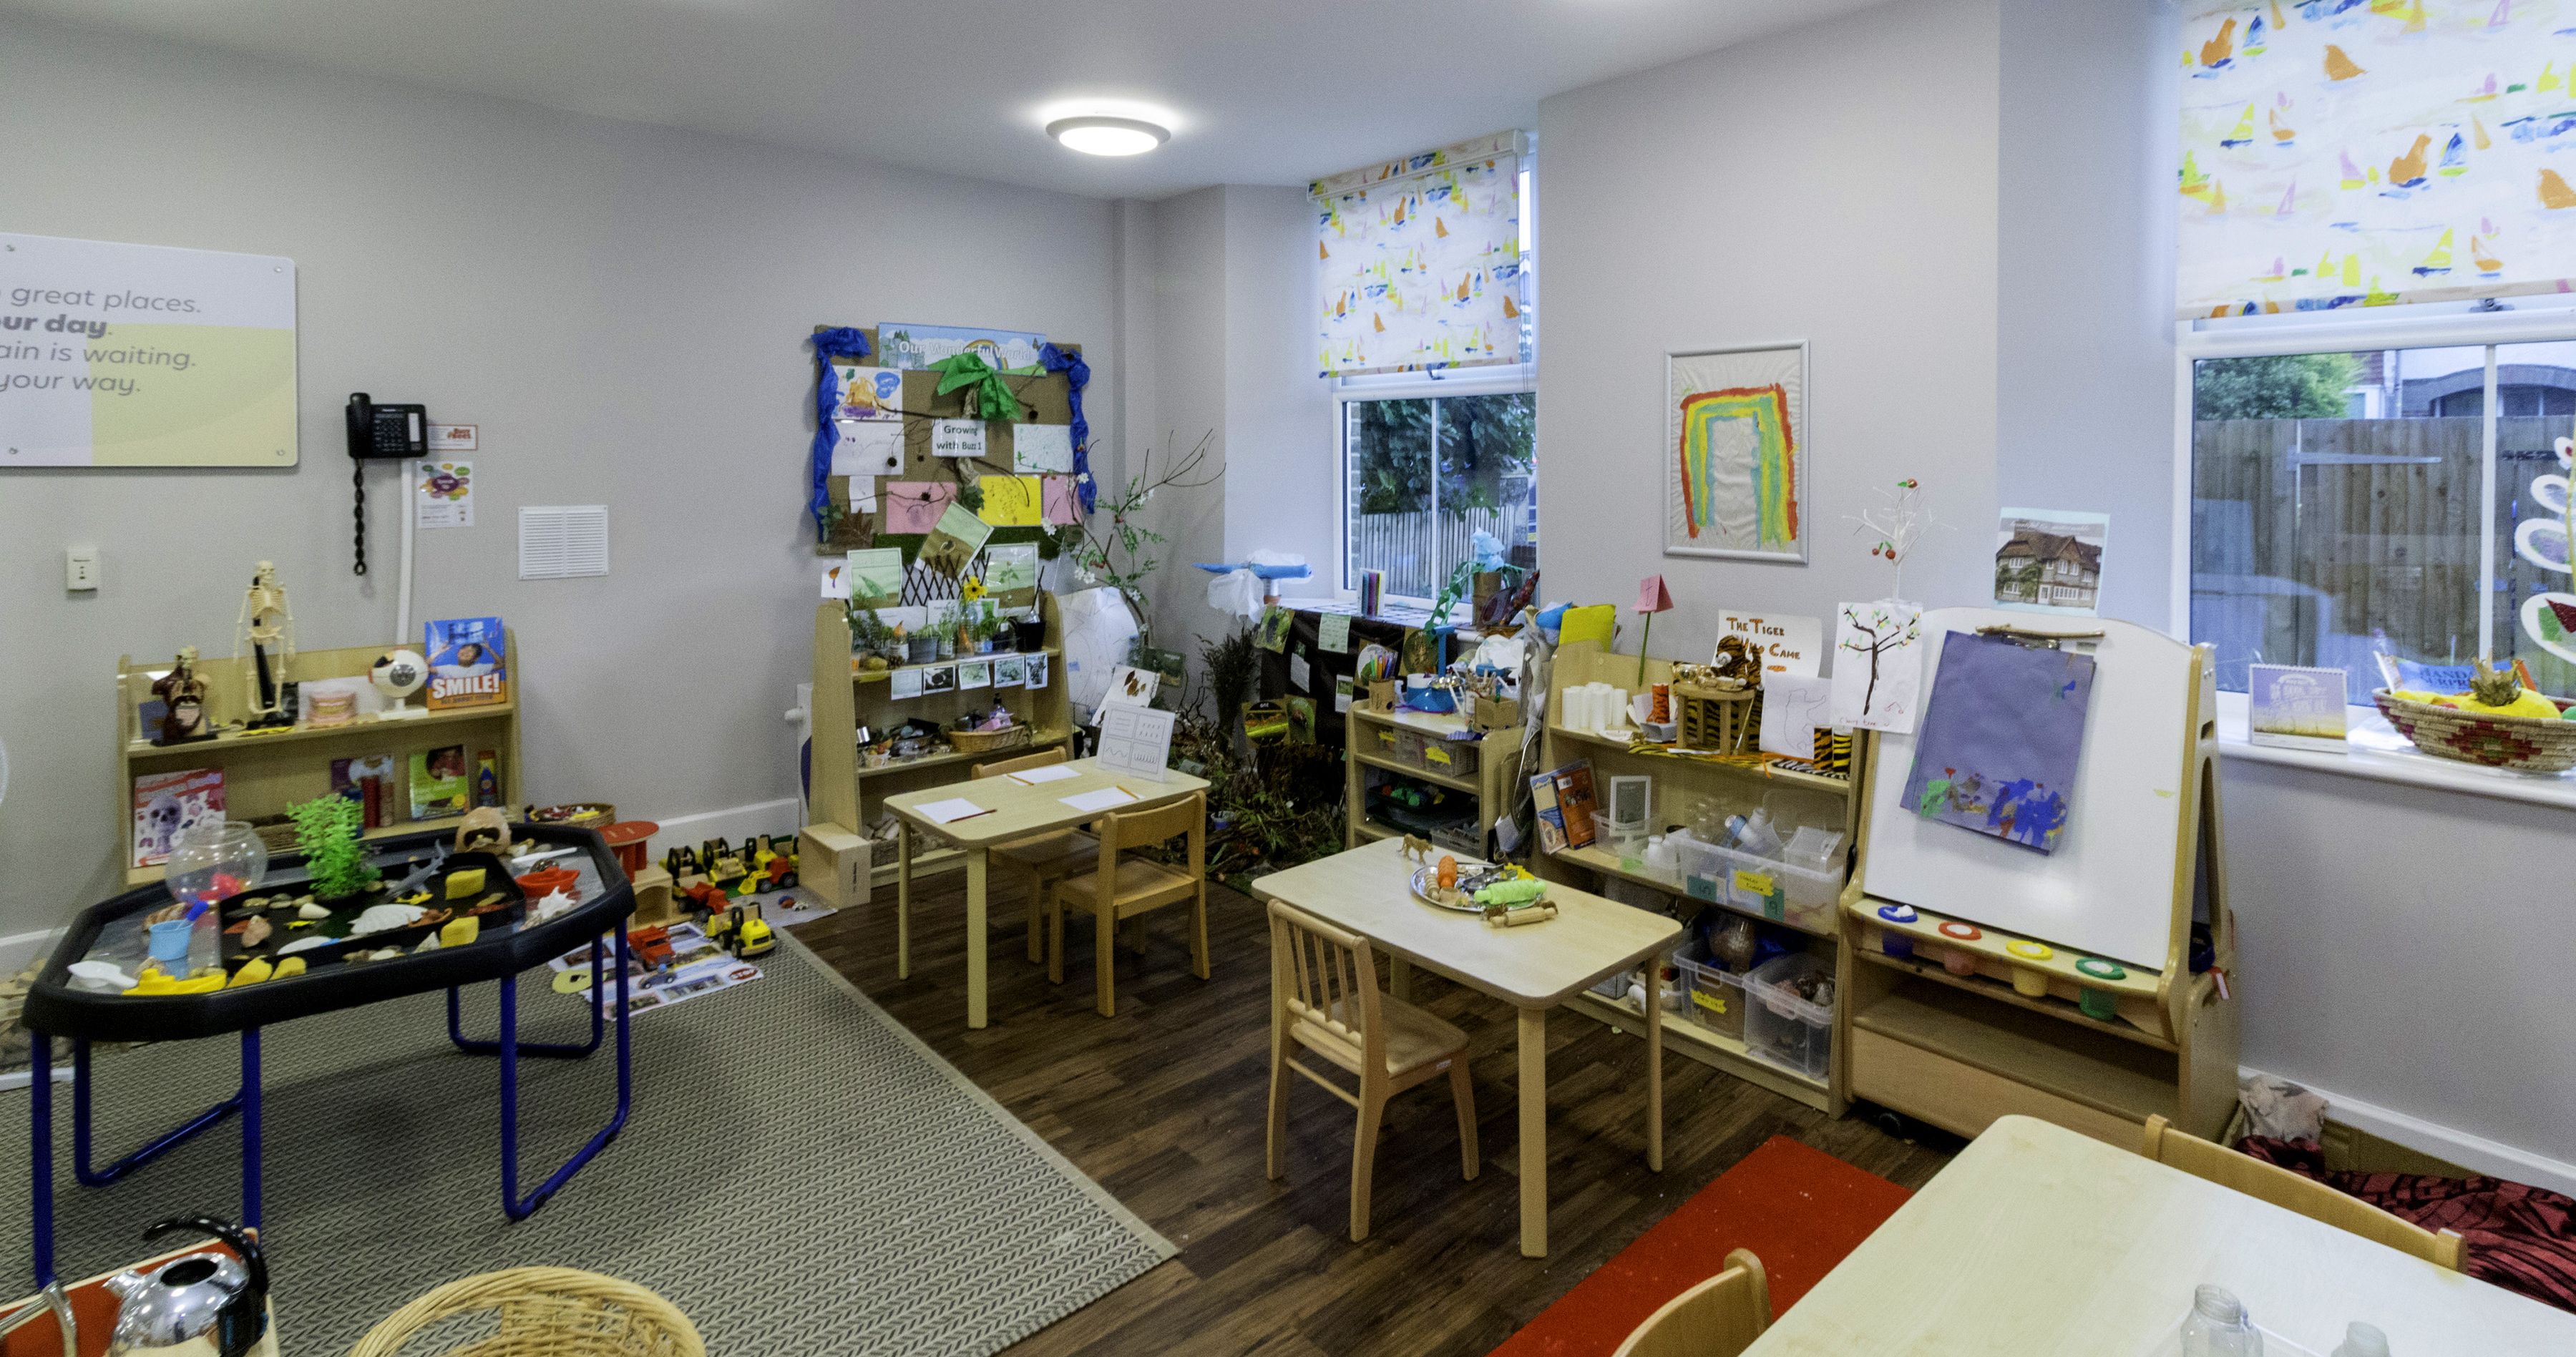 Busy Bees at East Grinstead - The best start in life Busy Bees at East Grinstead East Grinstead 01342 306500